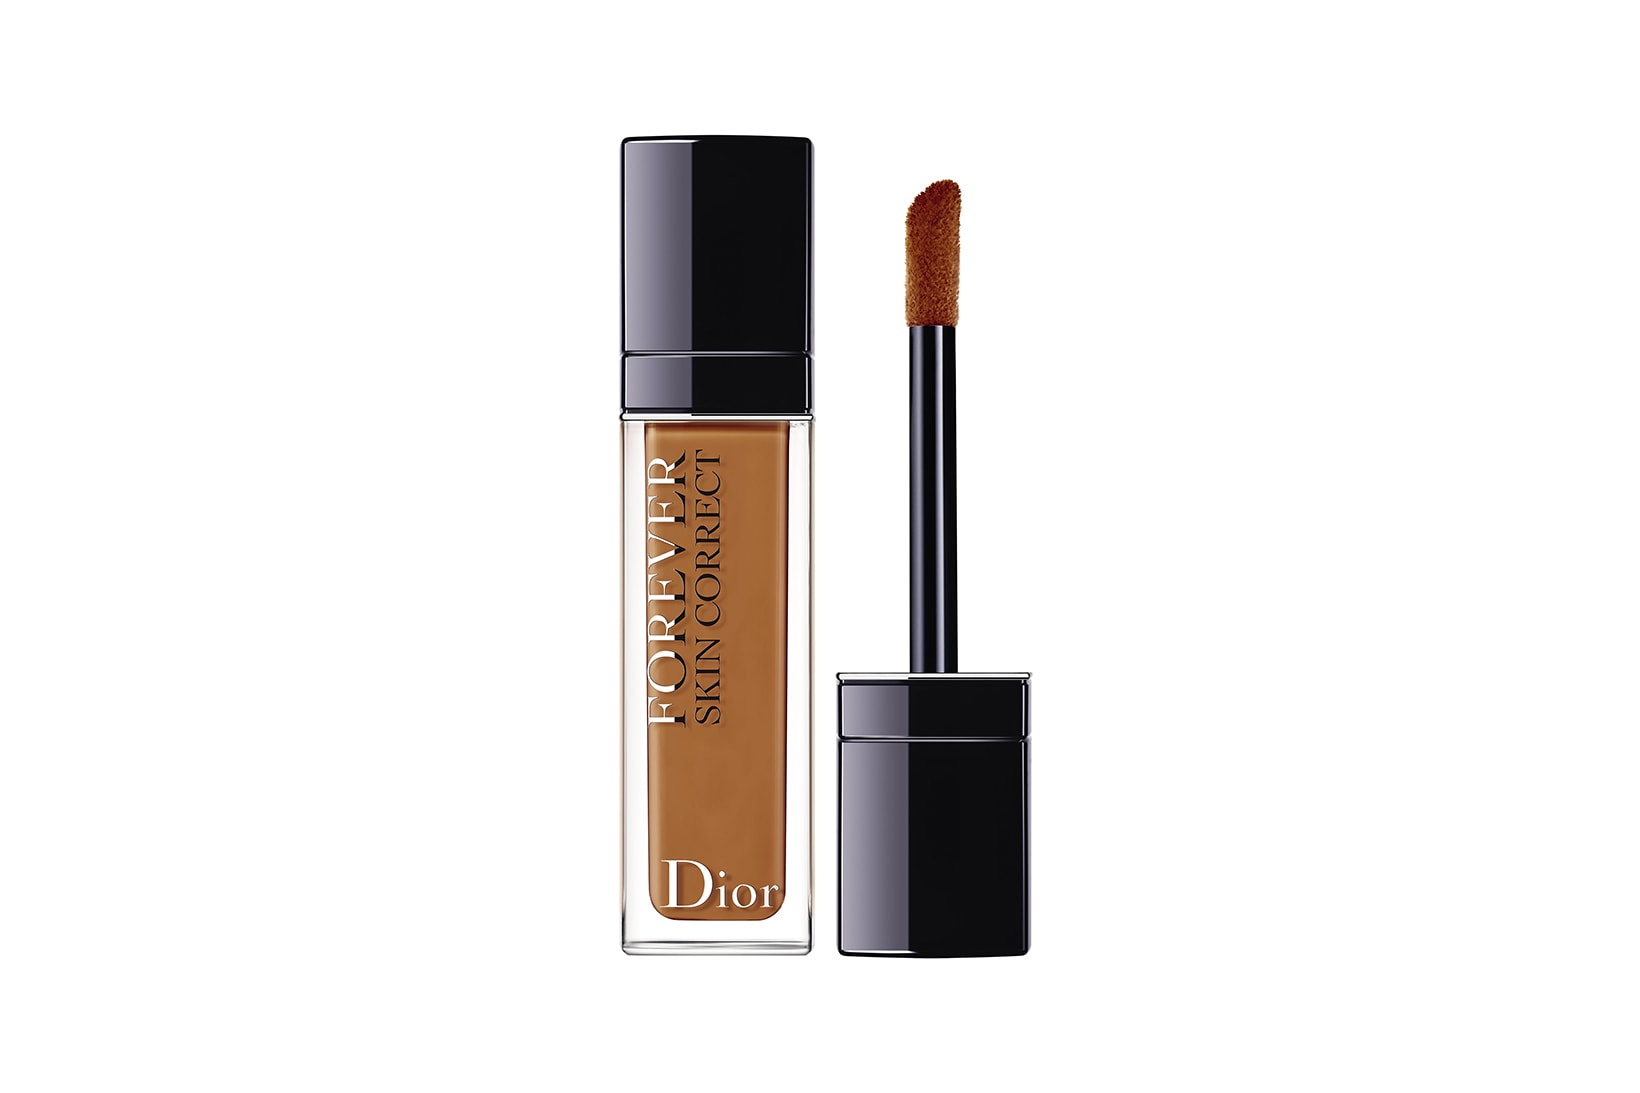 Dior Forever Correct Concealer Shades Colors